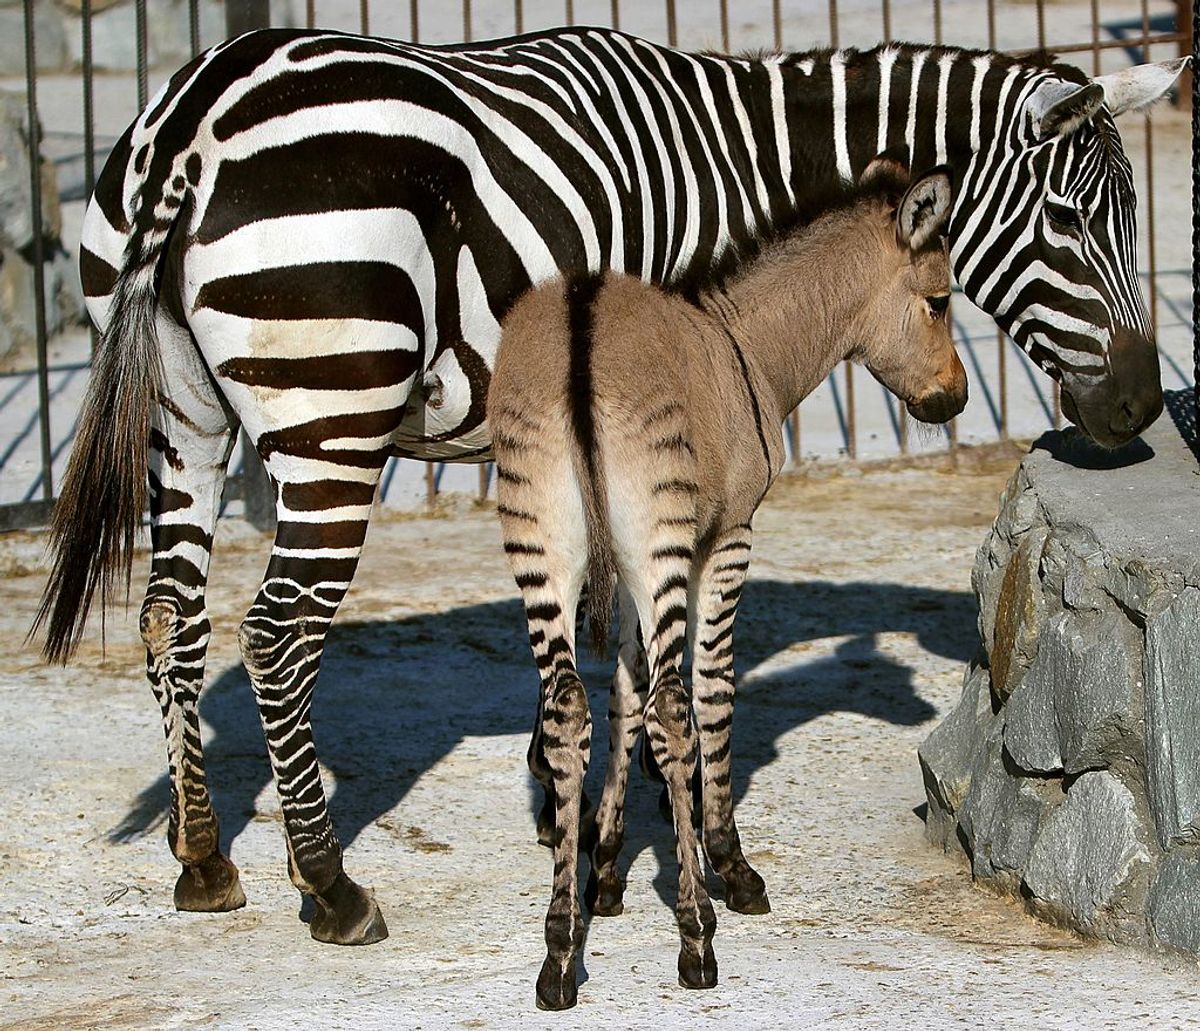 A hybrid (front) of zebra and a donkey plays with his mother at the Taigan zoo park outside Simferopol on August 5, 2014. A Crimean zoo has welcomed into its collection a "zebroid" or "zonkey" after a zebra gave birth following befriending a donkey. Named Telegraph by the keepers at the Taigan zoo park, his head and body resemble that of a donkey and are a solid beige colour, with his legs marked by black zebra stripes. Born last week, "Telegraph is very popular with visitors" who can watch him romping around with his mother, said director Oleg Zubkov. Crosses between zebras and other members of the equine family are not unheard of, although it is more unusual that the zebra is the mother. However allowing such breeding to occur is frowned upon in the zoo community.   AFP PHOTO/ YURIY LASHOV        (Photo credit should read YURI LASHOV/AFP via Getty Images) (YURIY LASHOV / Getty Images)